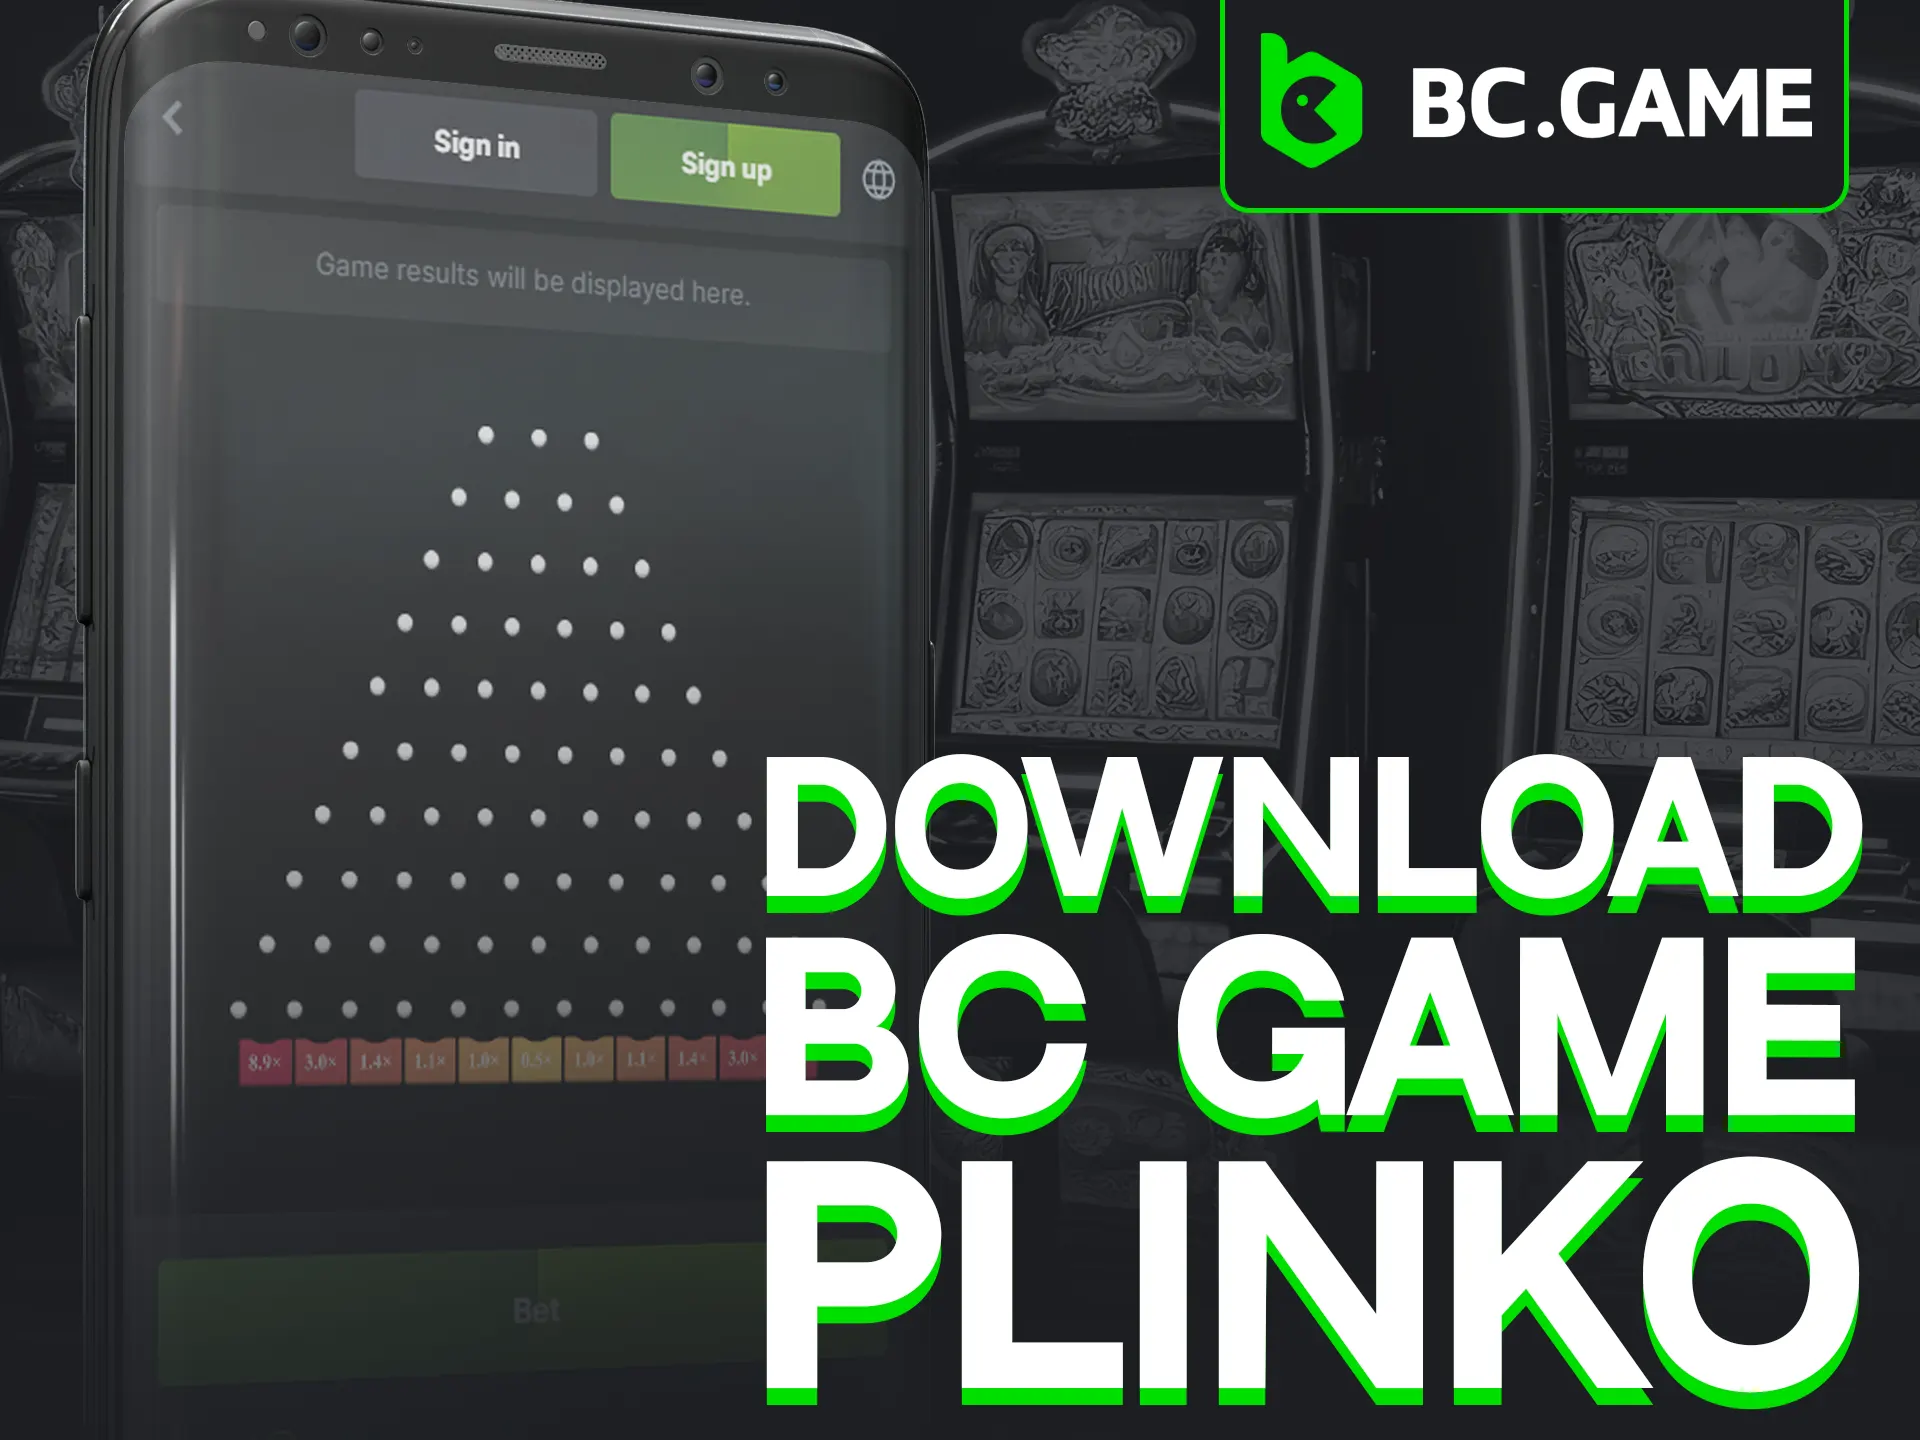 Get BC Game's Plinko on mobile for convenience.